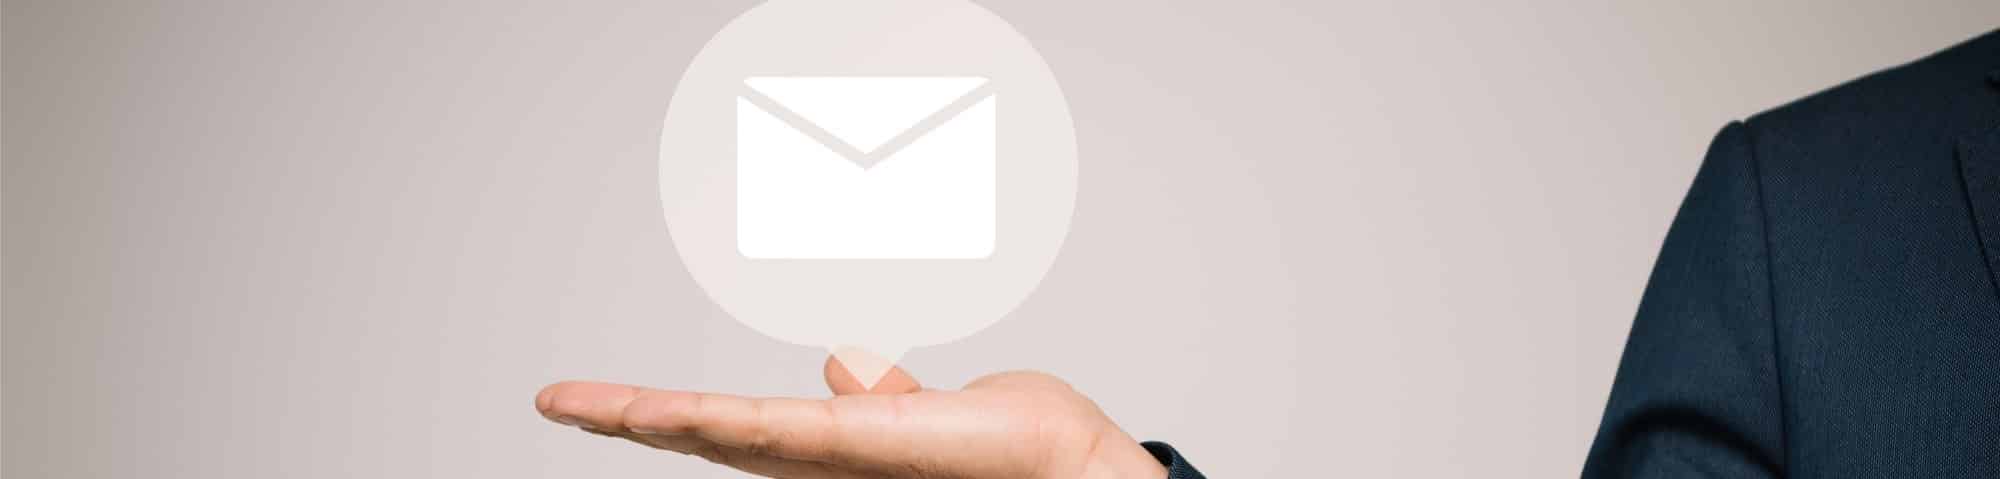 Email Marketing - The Secret Sauce to Growing Your Business